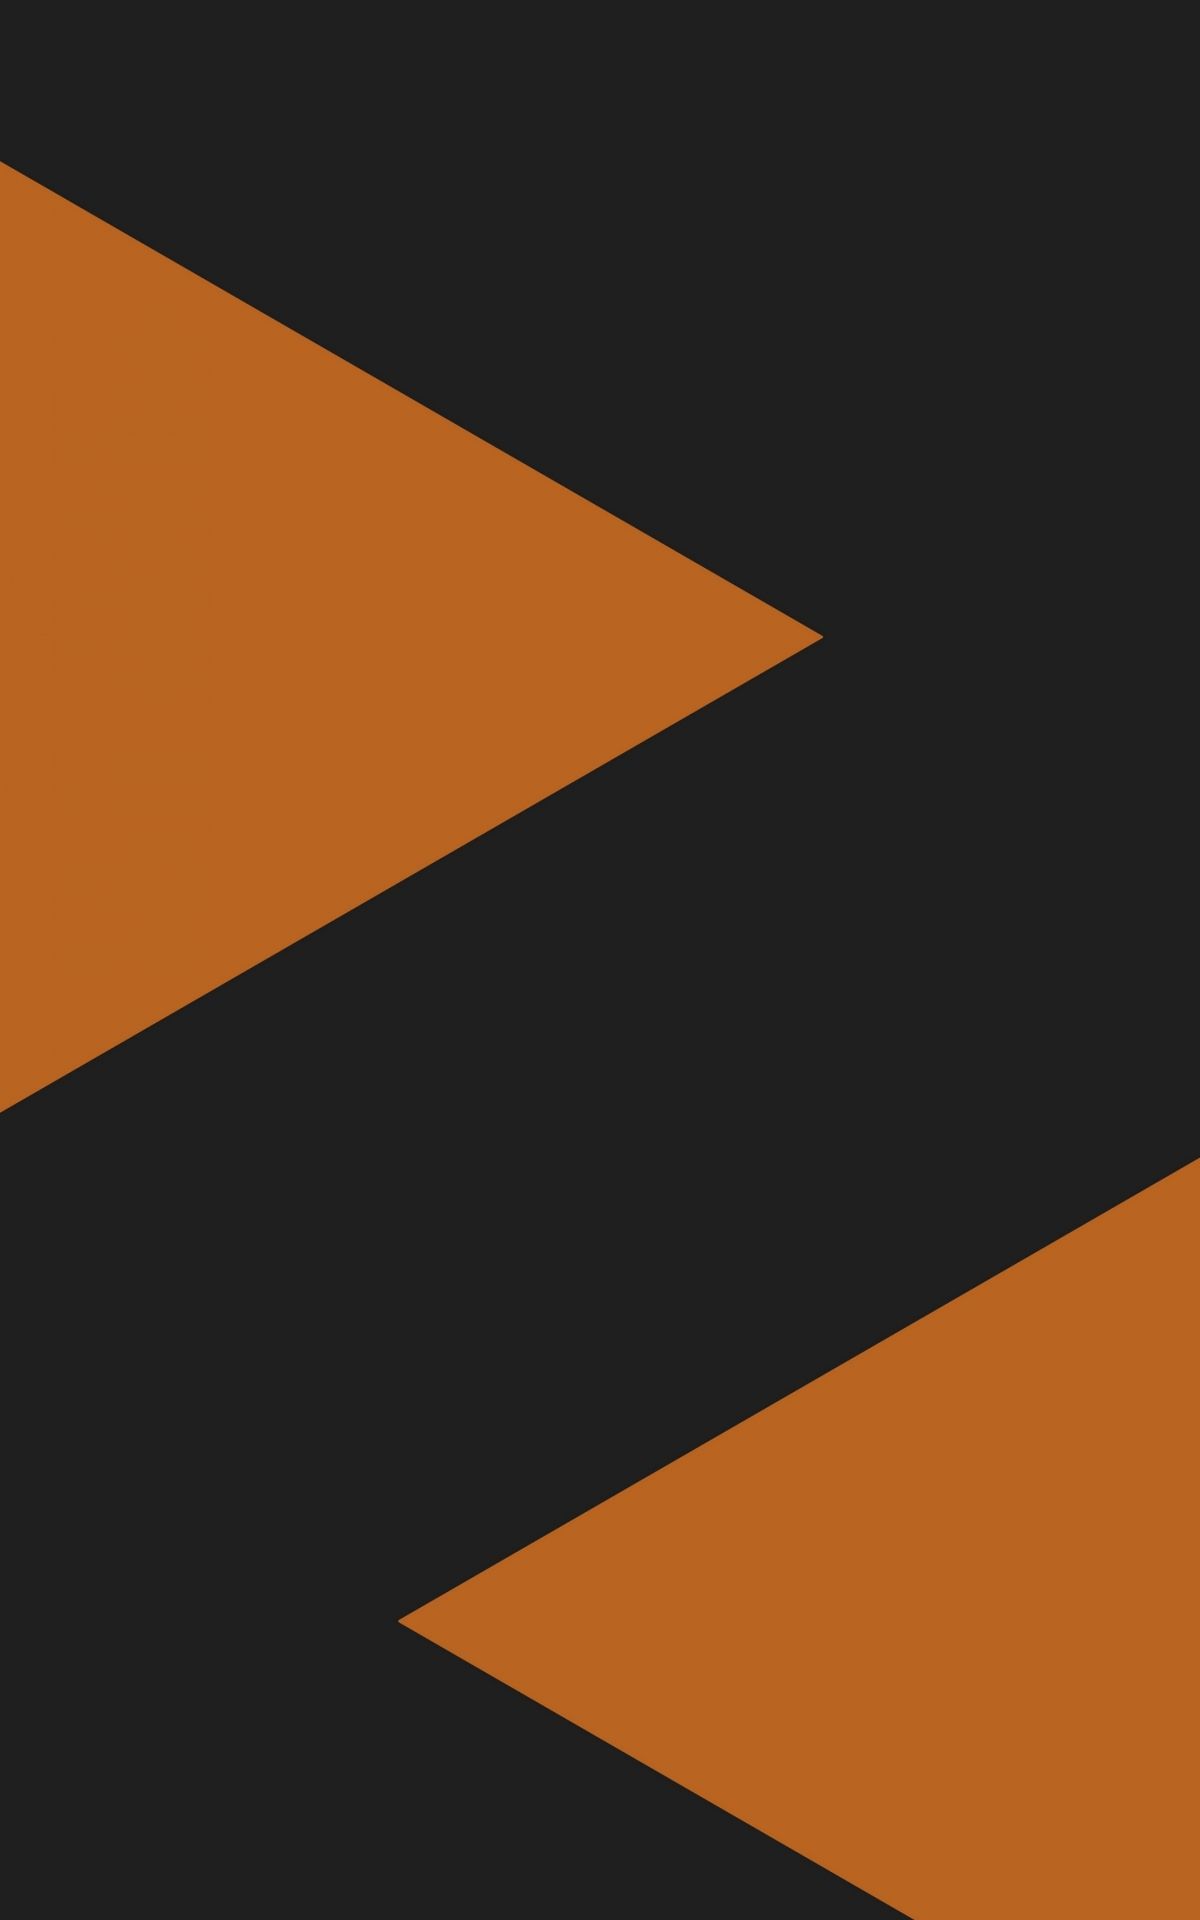 Free download Download wallpaper 1440x2560 triangles geometry minimalism [1440x2560] for your Desktop, Mobile & Tablet. Explore Orange And Black Wallpaper. Black And Orange Background, Orange And Black Wallpaper, Black